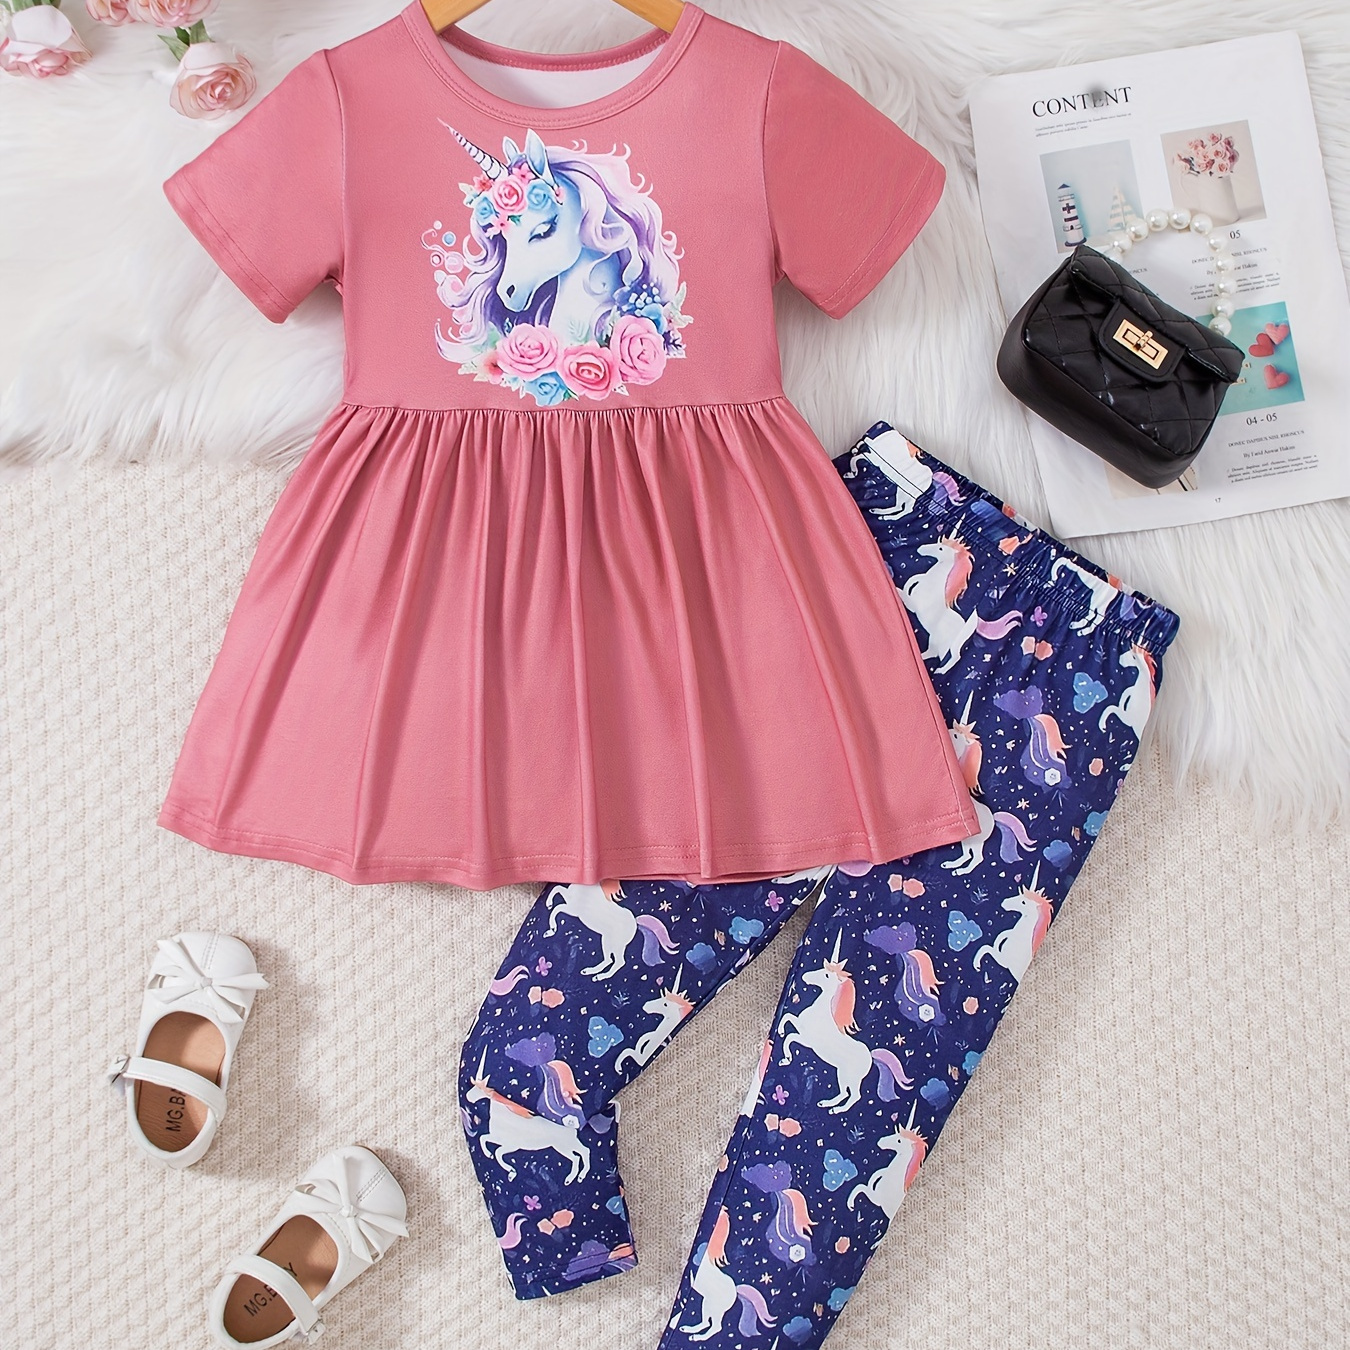 

Sweet Unicorn Graphic 2pcs Outfits Girls Short Sleeve Top + Pants Set Summer Party Gift